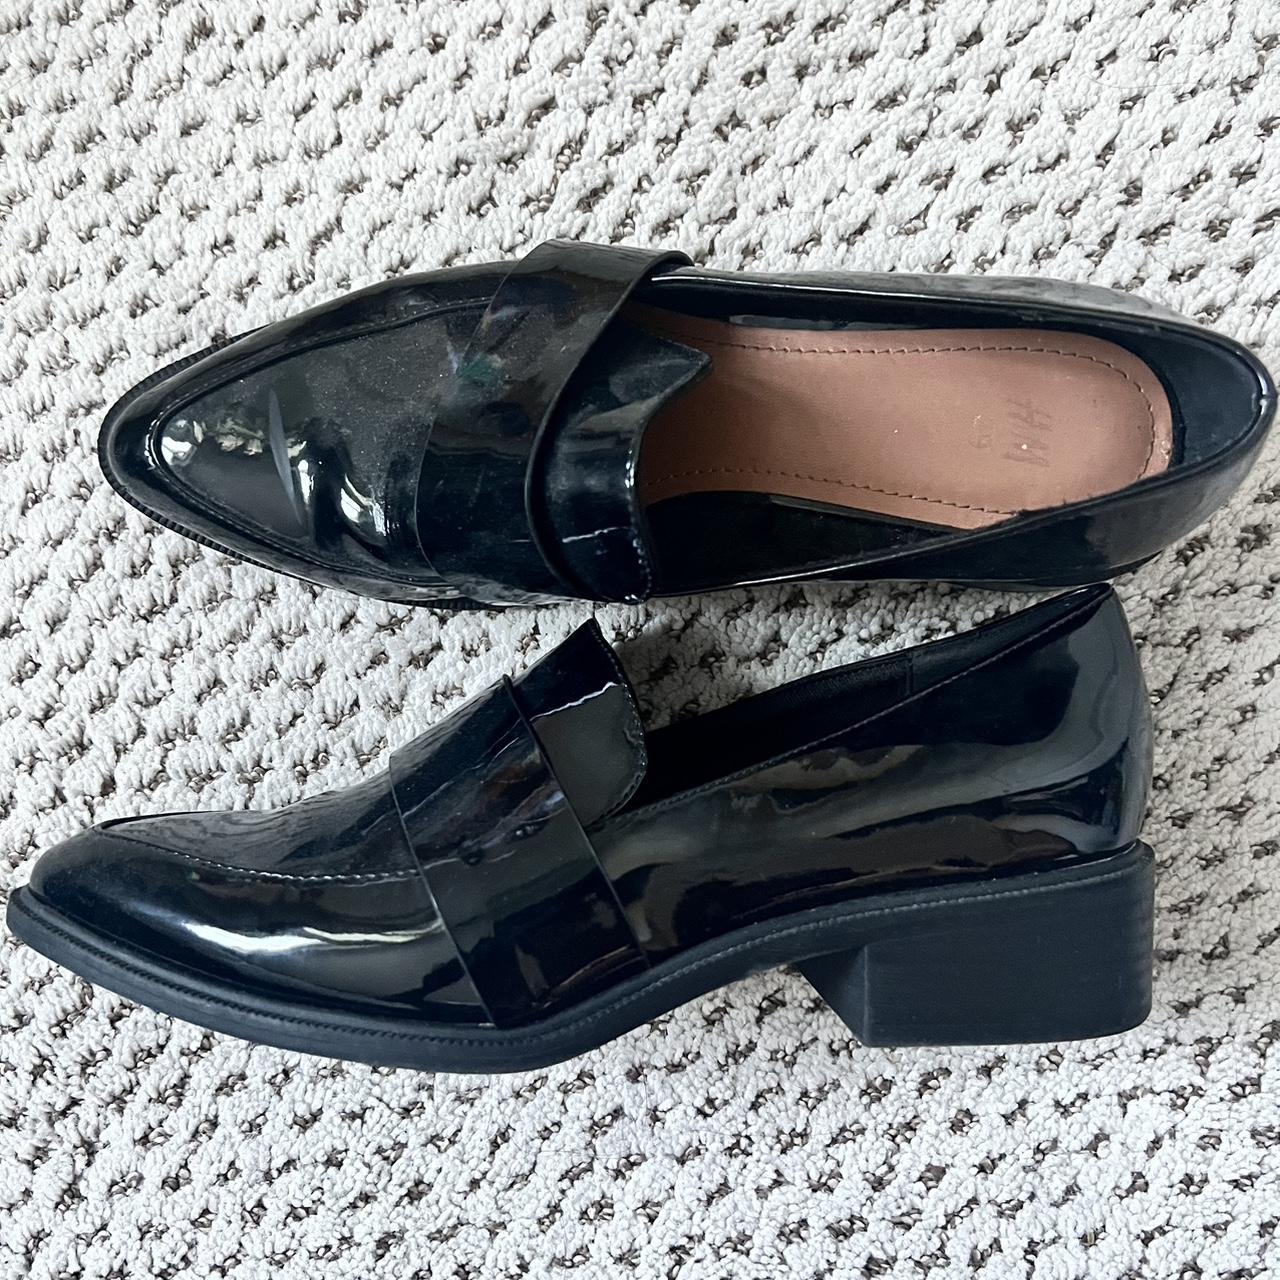 H&M Women's Loafers